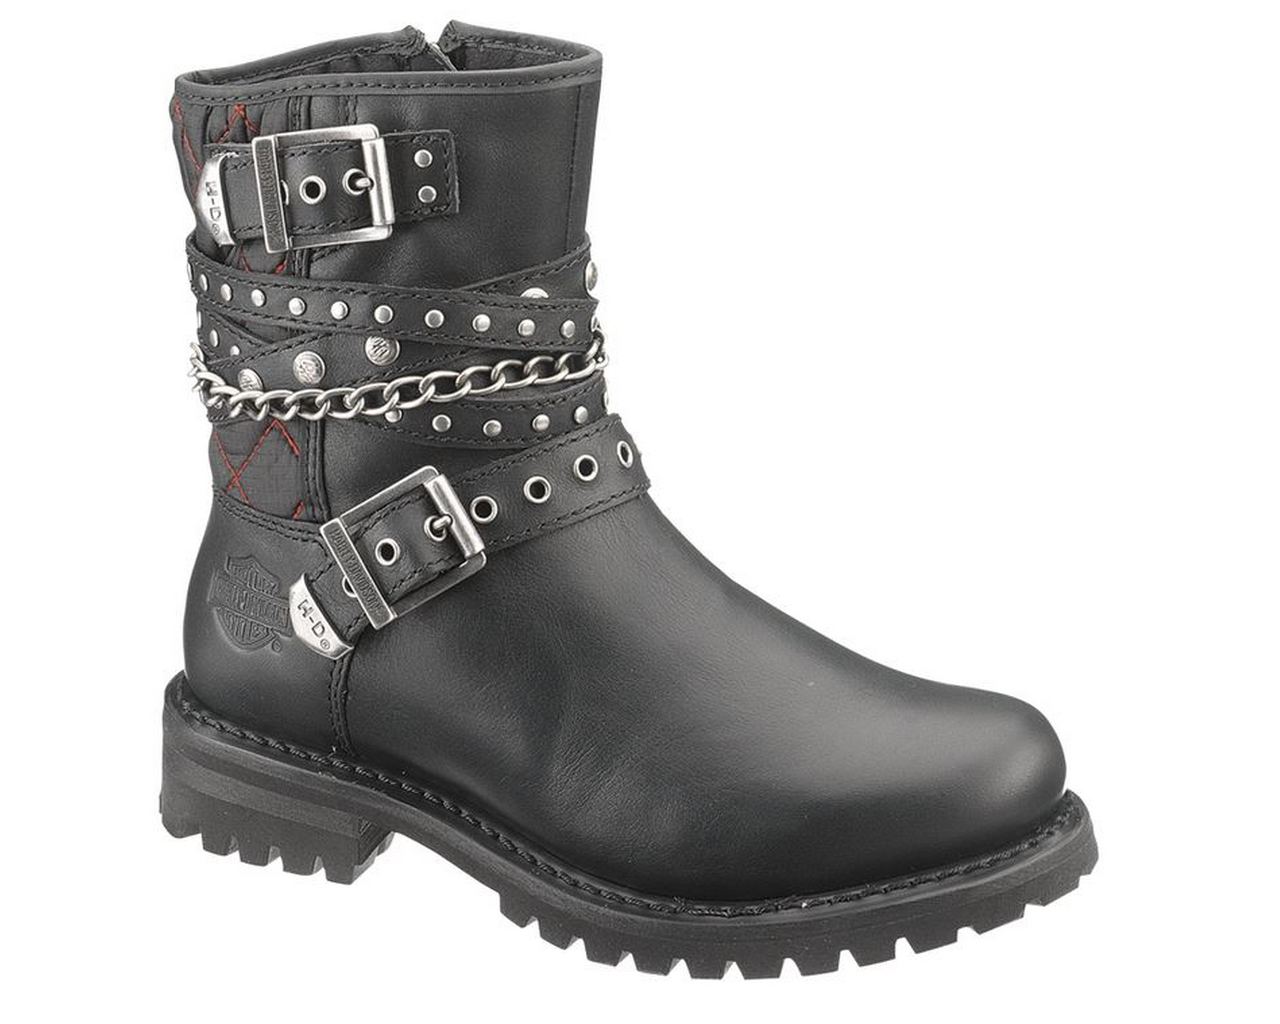 harley davidson boots with zippers